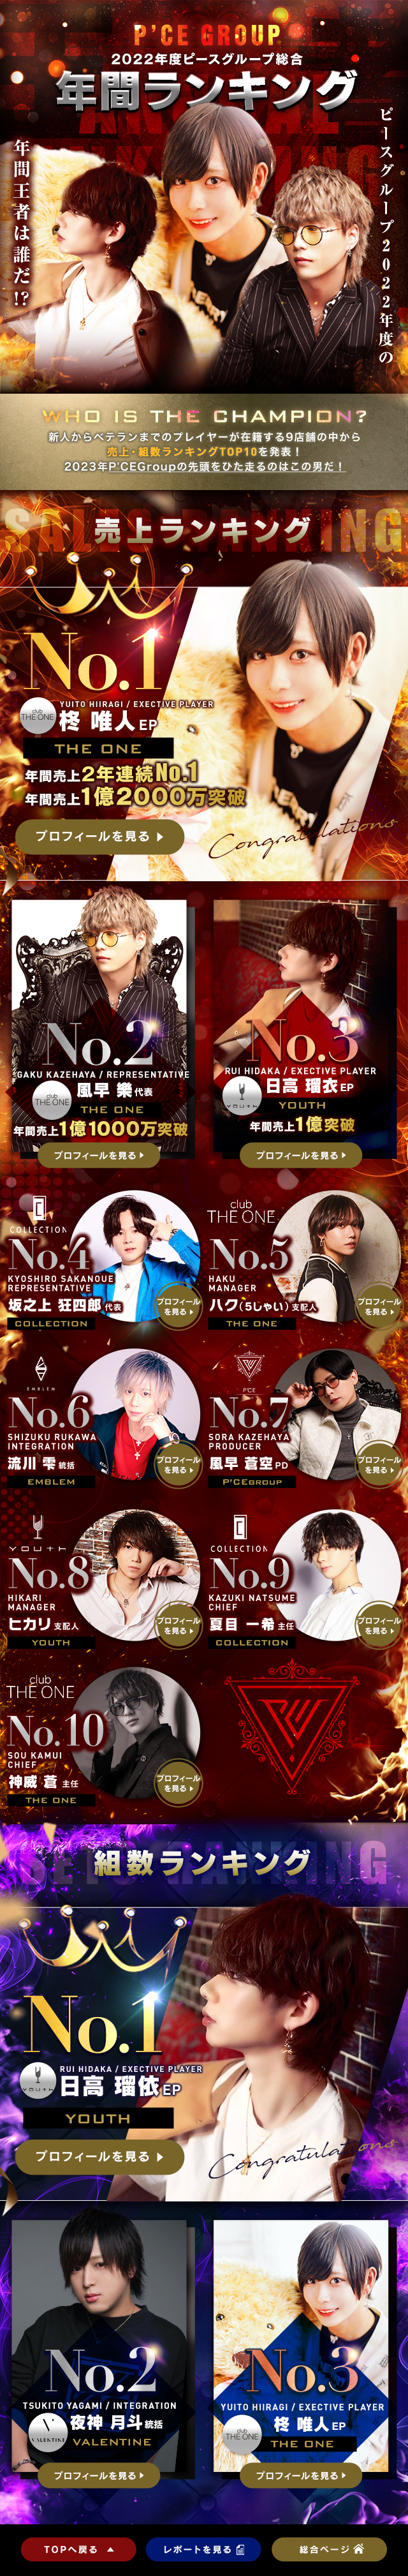 P'CE GROUP 2022年度年間グループ総合ランキング